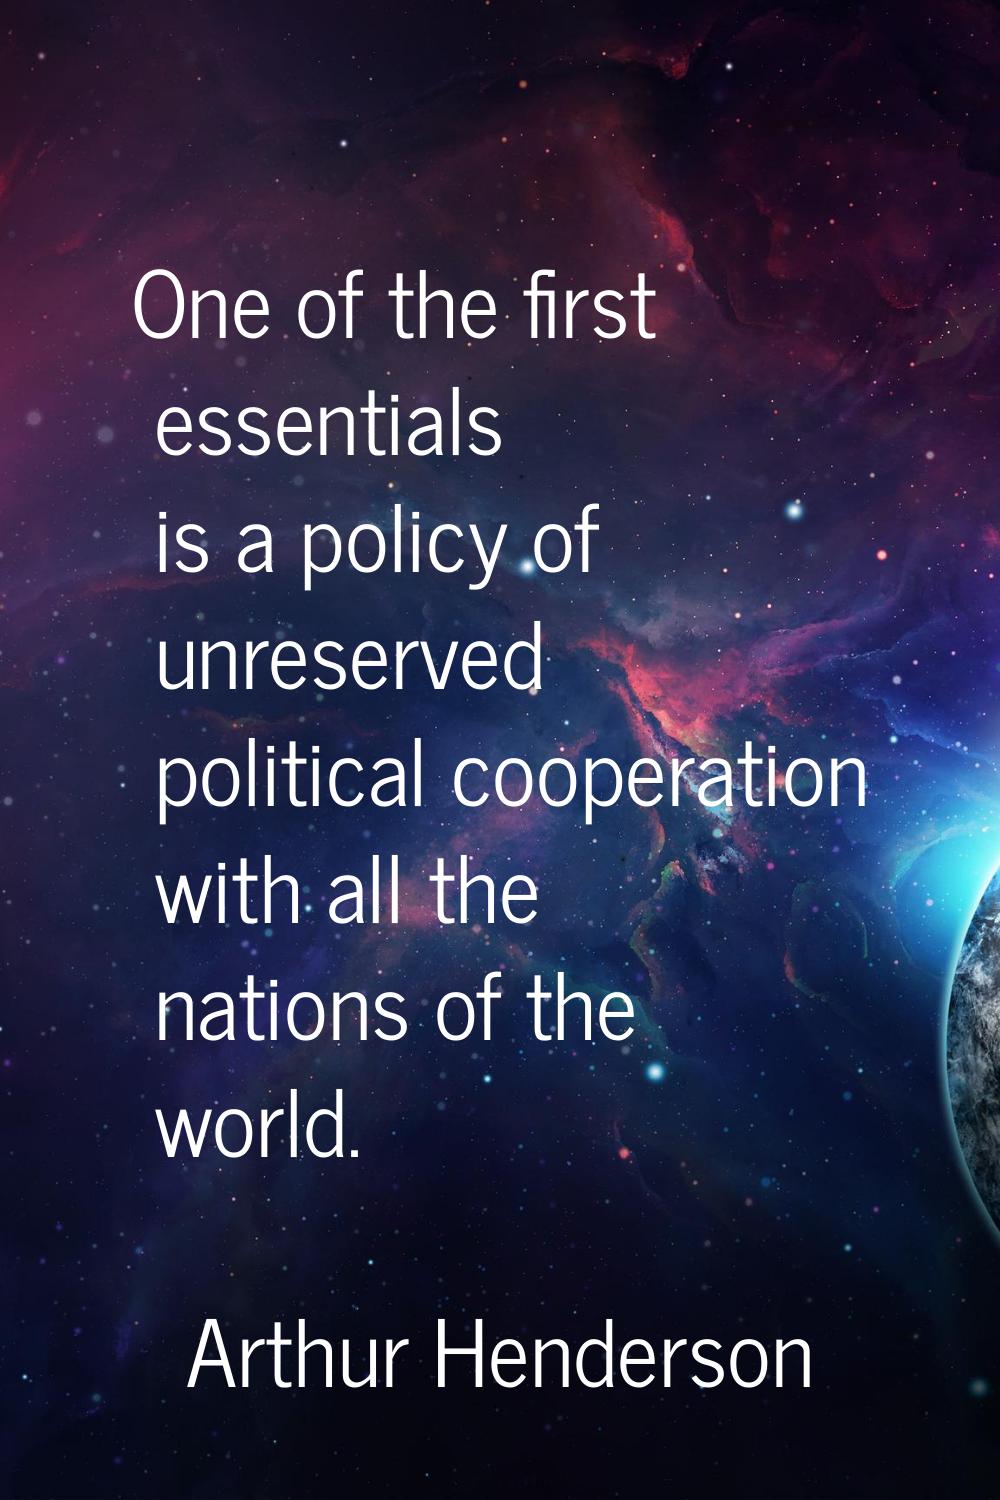 One of the first essentials is a policy of unreserved political cooperation with all the nations of